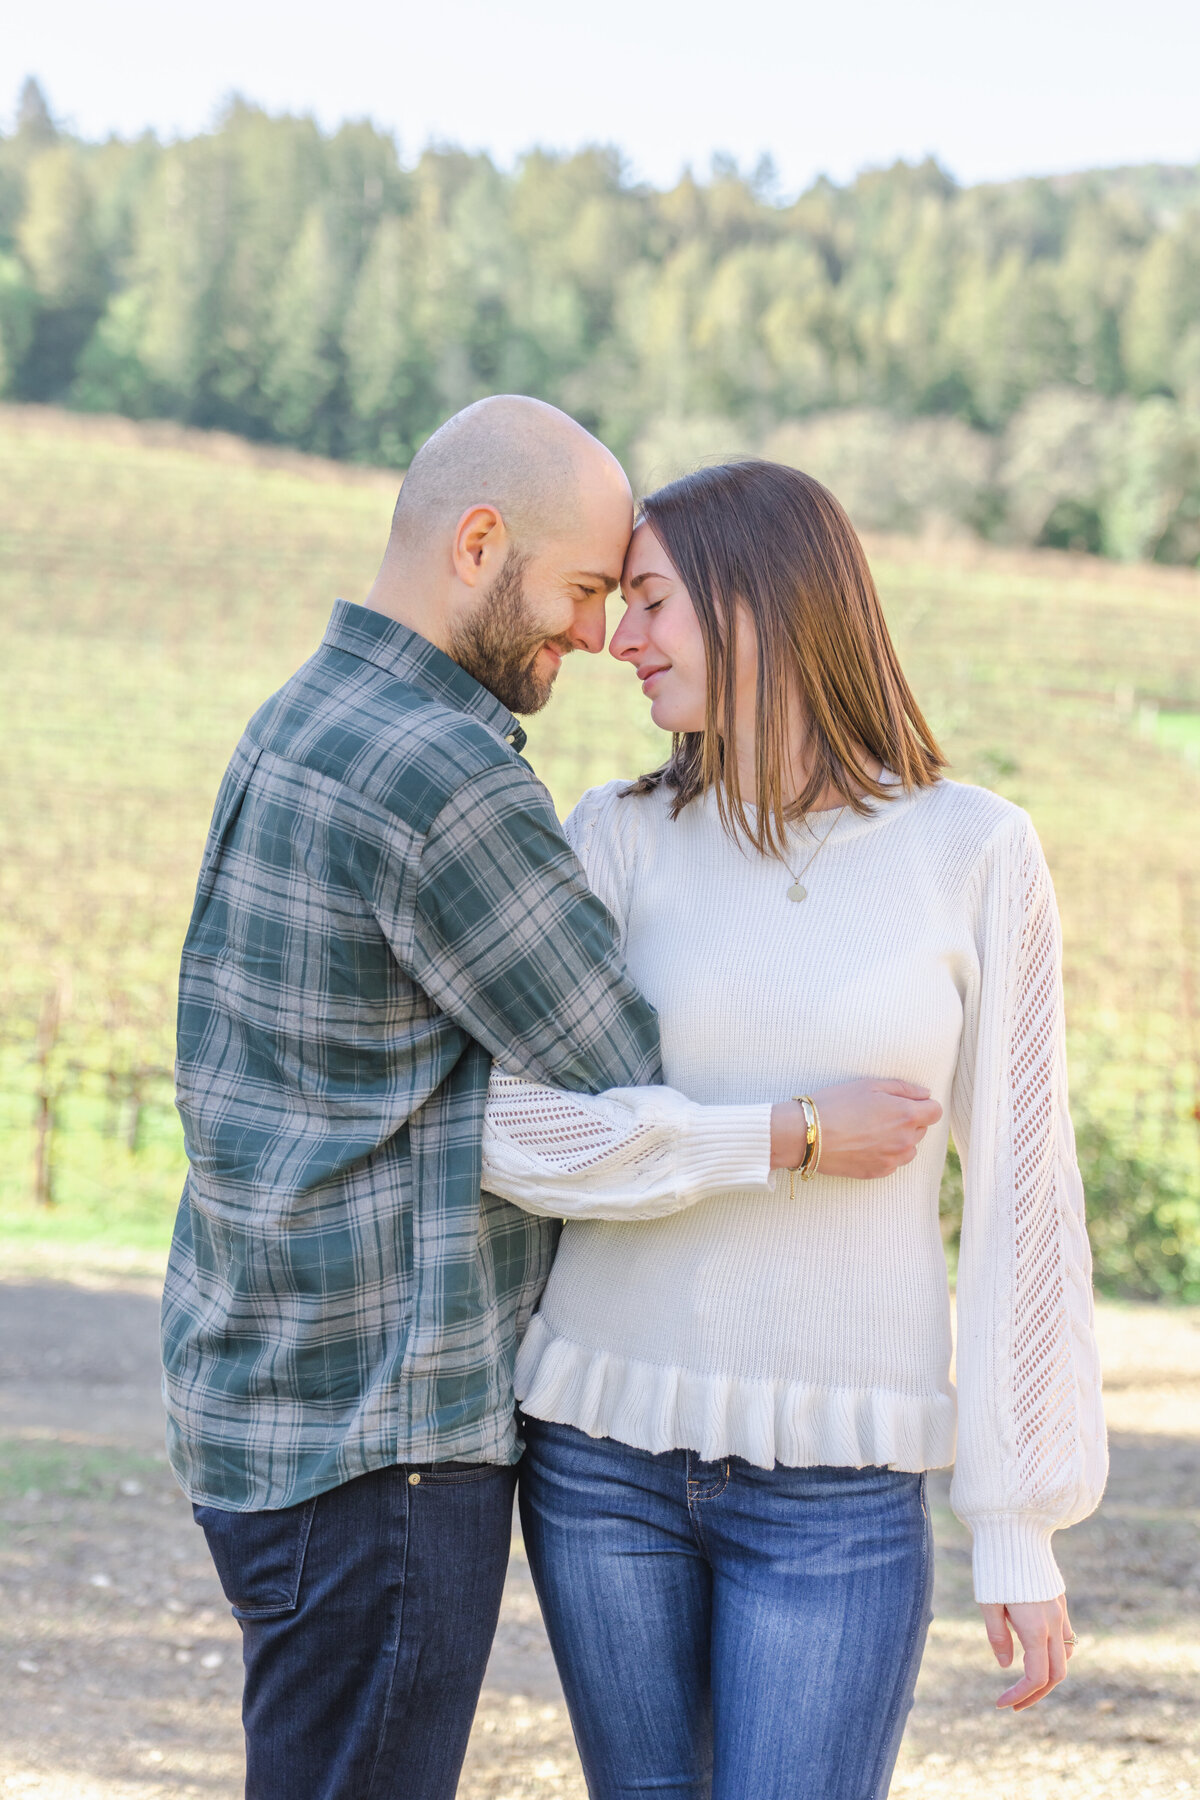 Engagement session at Jack London Park in Sonoma California